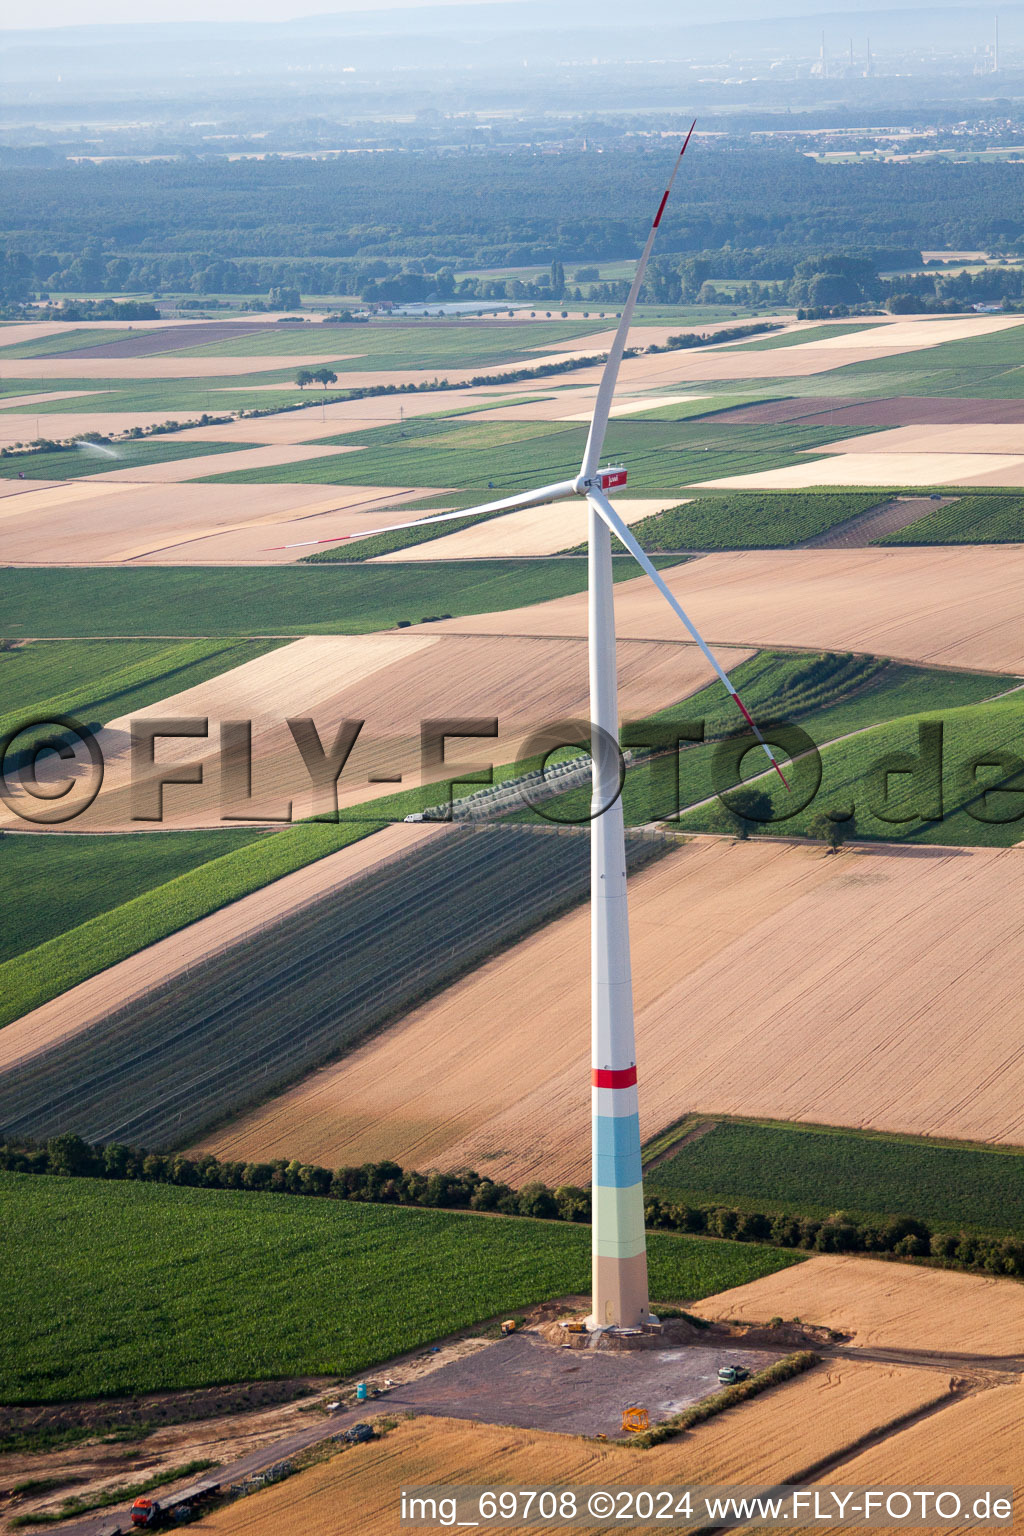 Aerial photograpy of Wind farm construction in Offenbach an der Queich in the state Rhineland-Palatinate, Germany